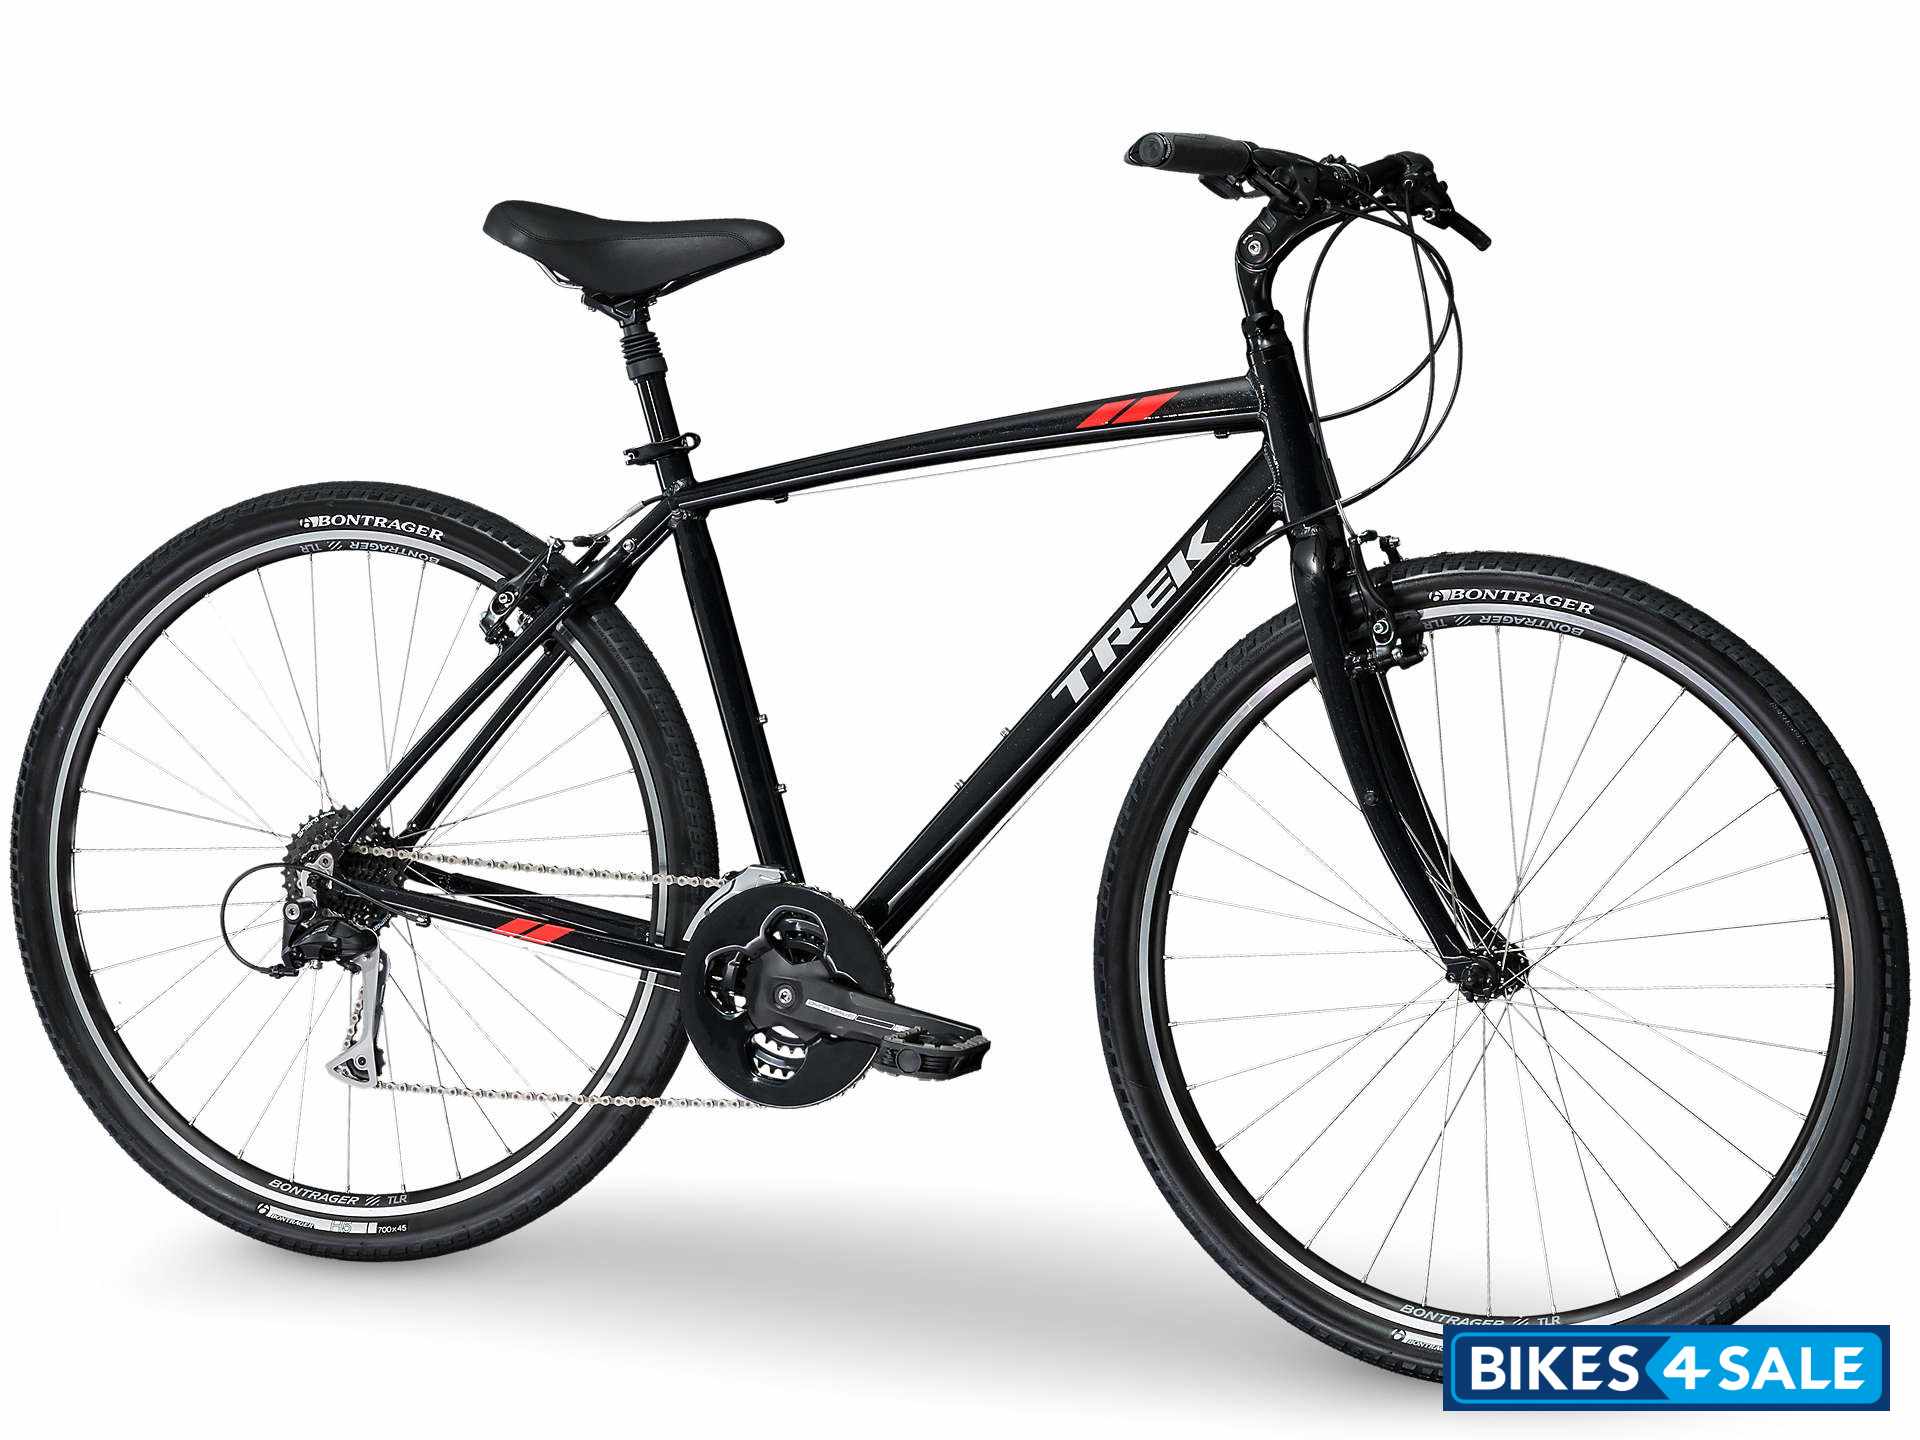 Trek Verve 3 Bicycle Price, Review, Specs and Features Bikes4Sale